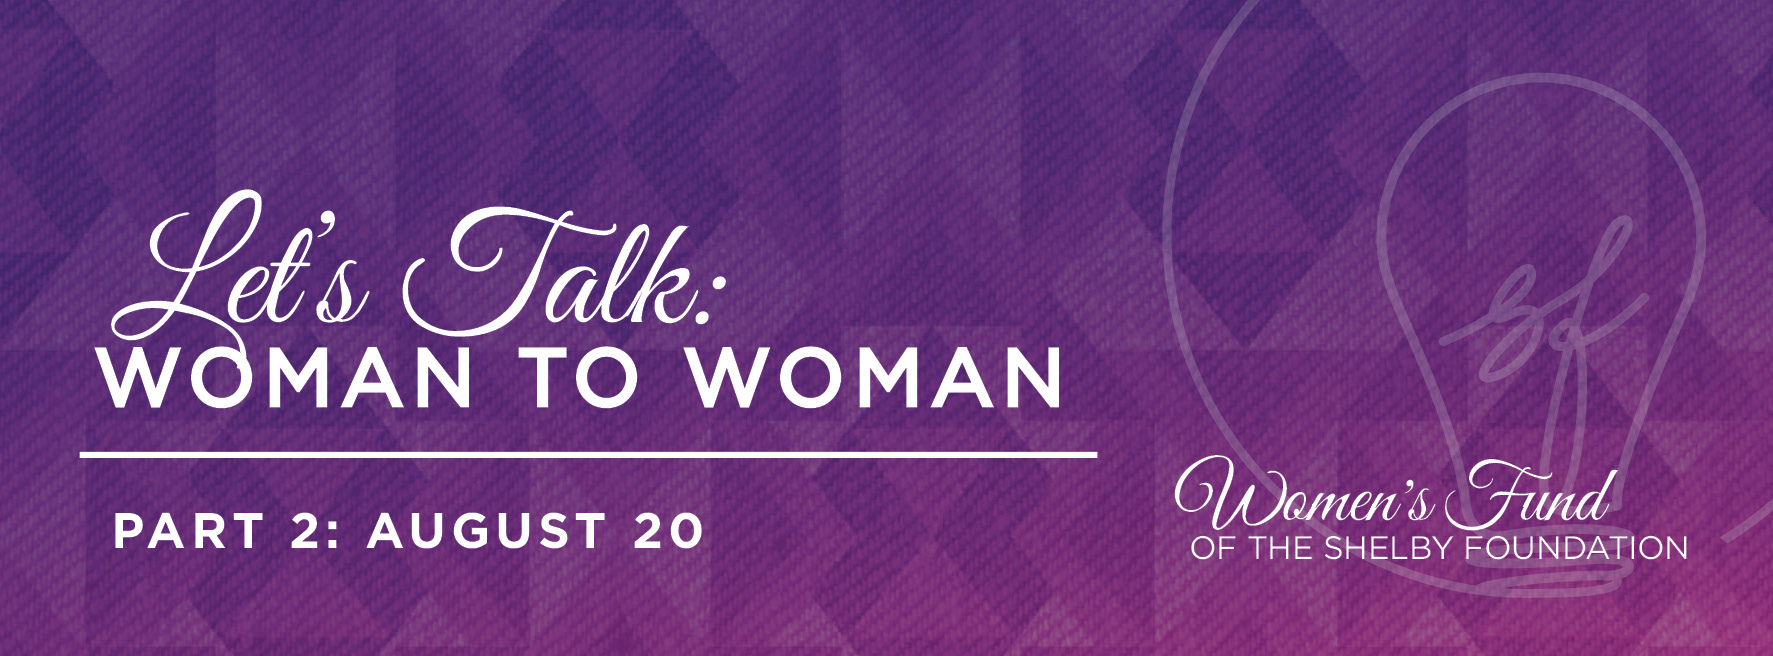 Let's Talk: Woman to Woman Lecture Series Part 2 | The Shelby Foundation